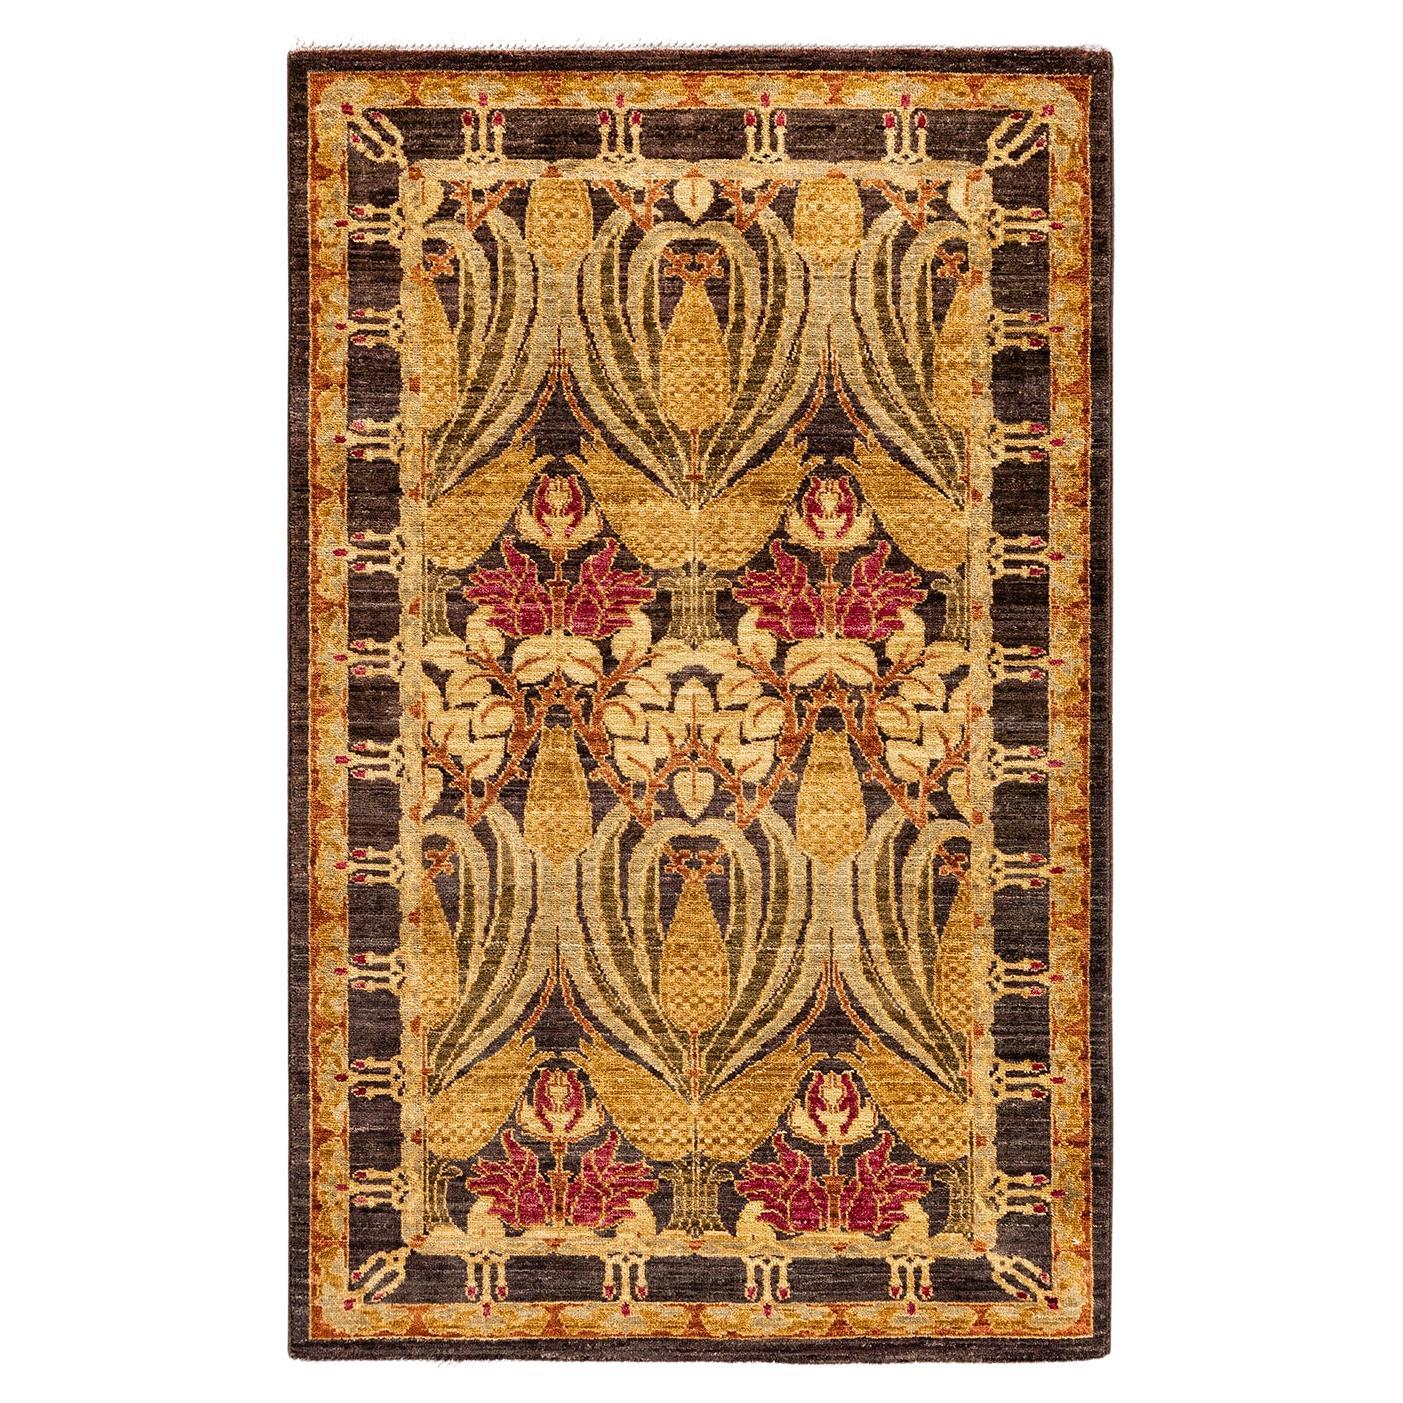 Contemporary Arts & Crafts Hand Knotted Wool Beige Area Rug